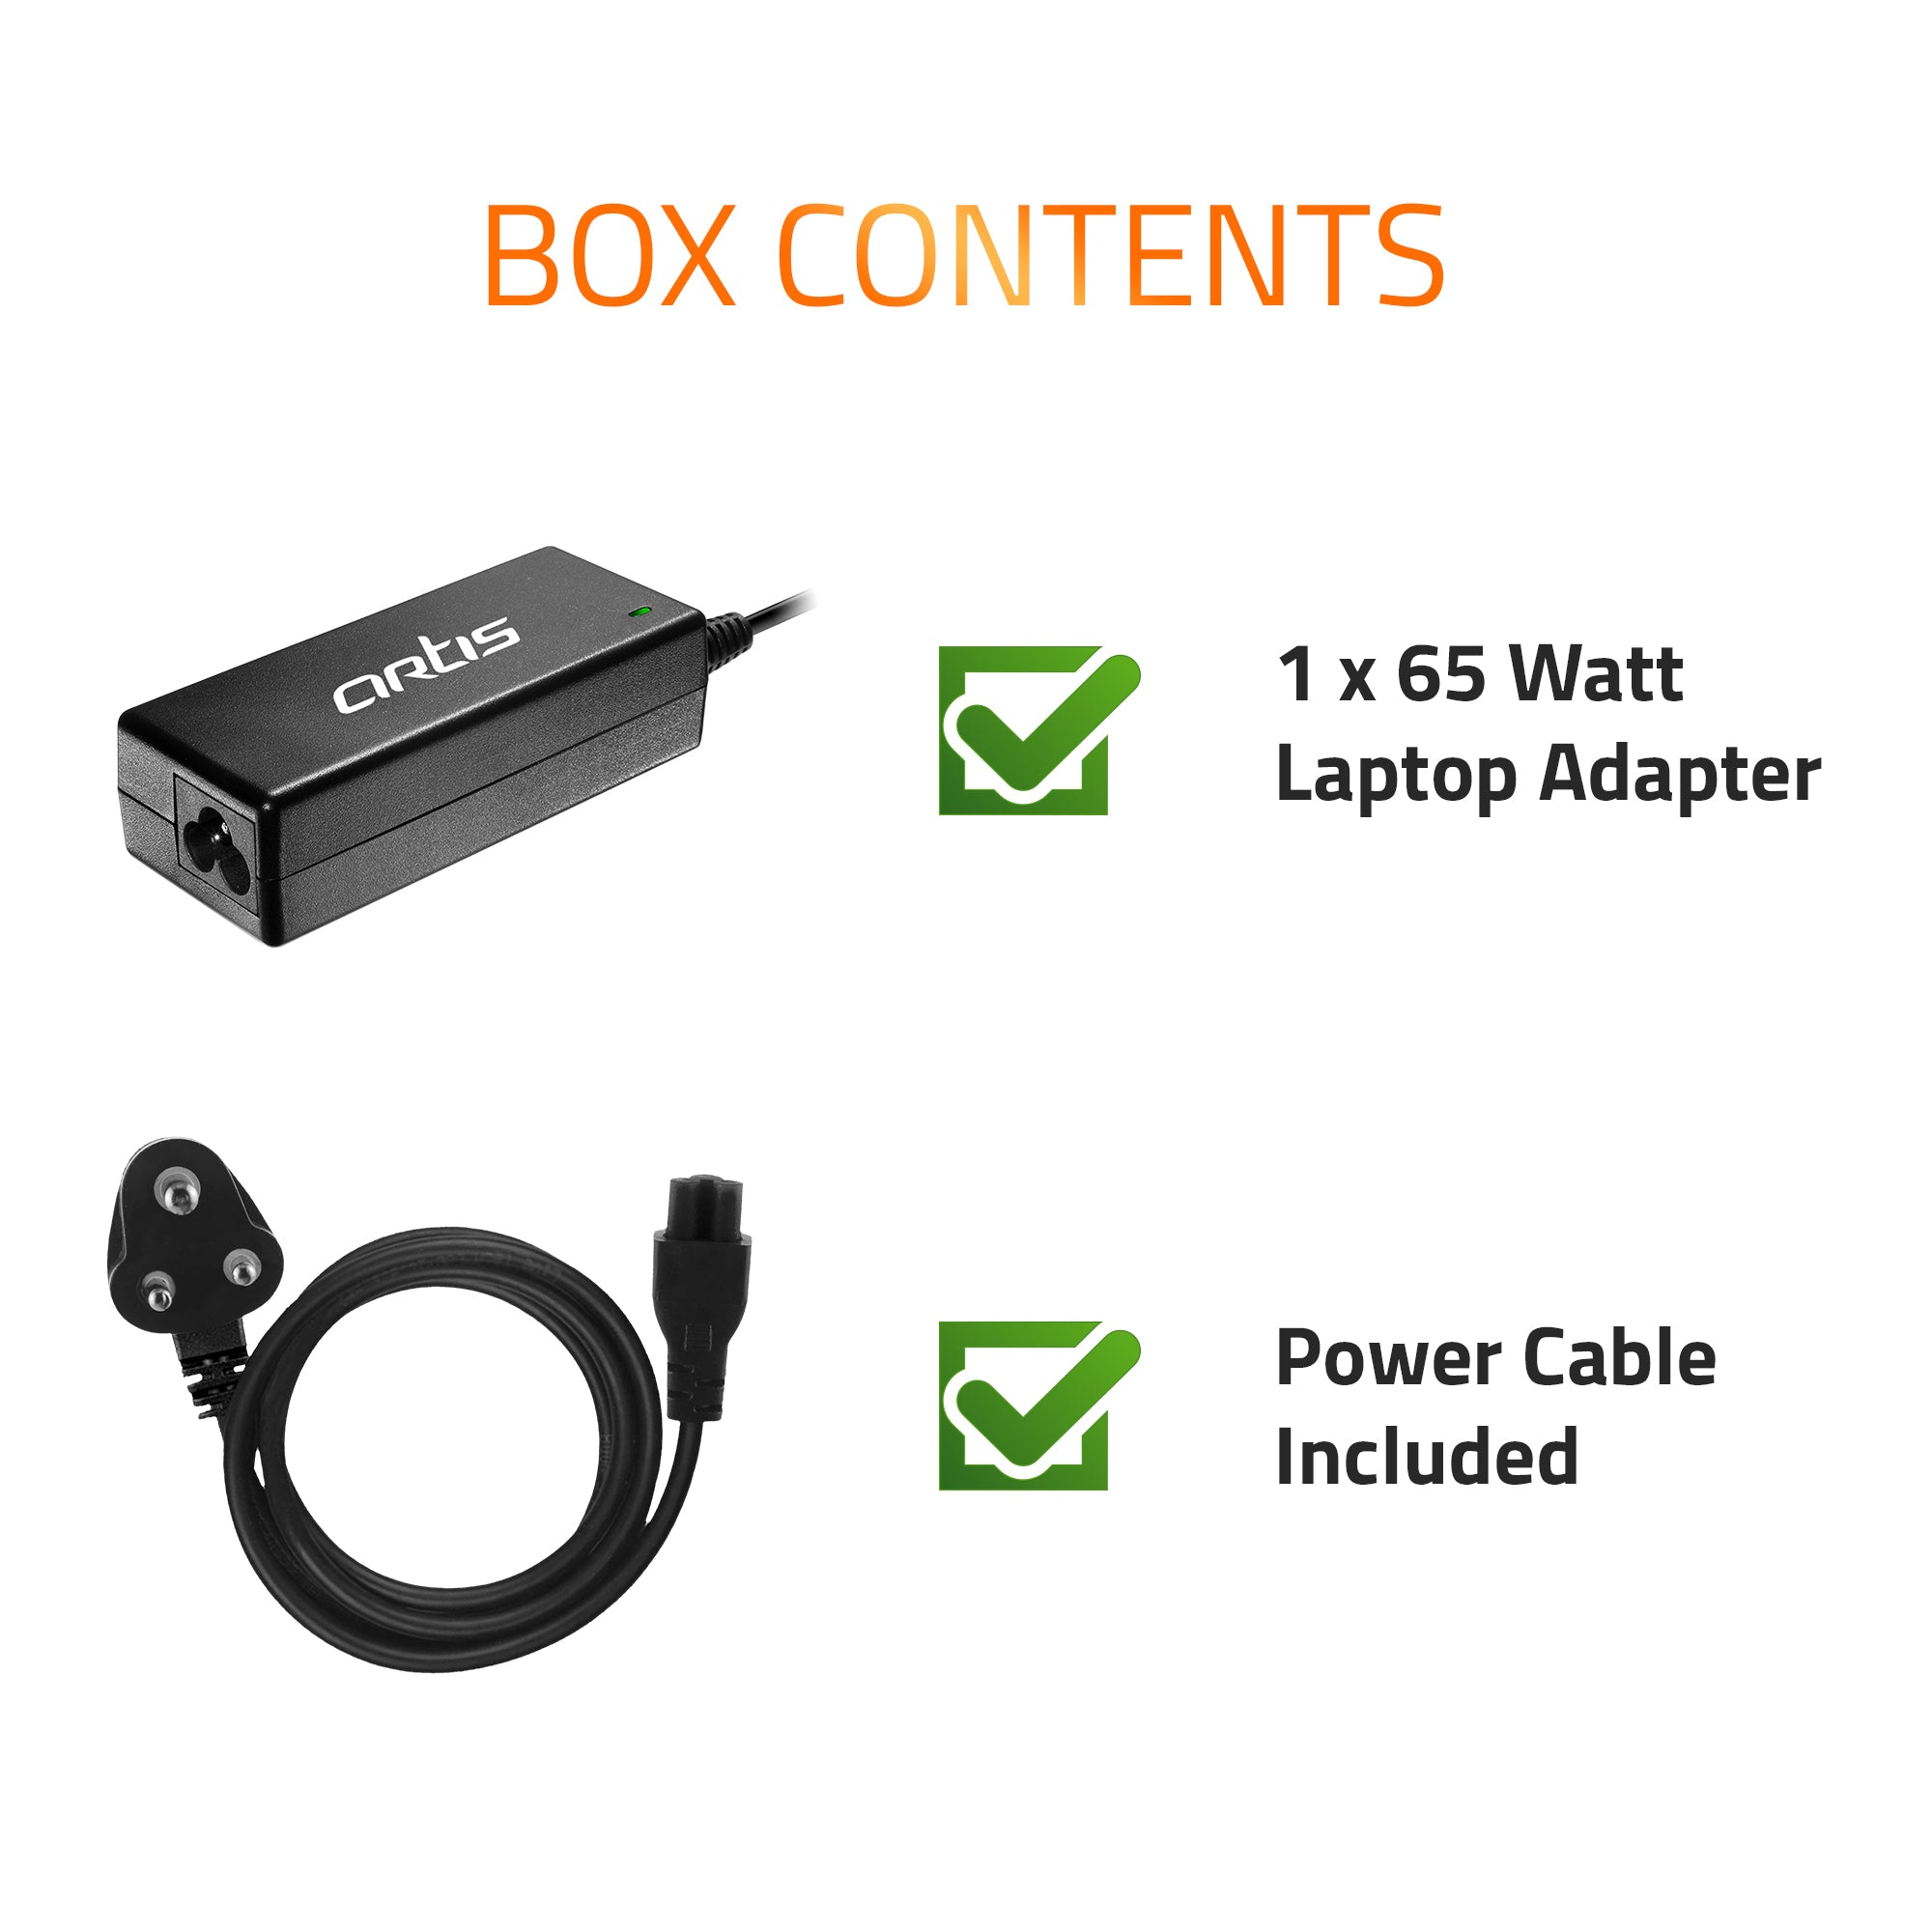 AR0509 65 Watt Laptop Charger Adapter Compatible with Acer Laptops (19V/3.42A ,Pin : 5.5 x 2.5 mm)